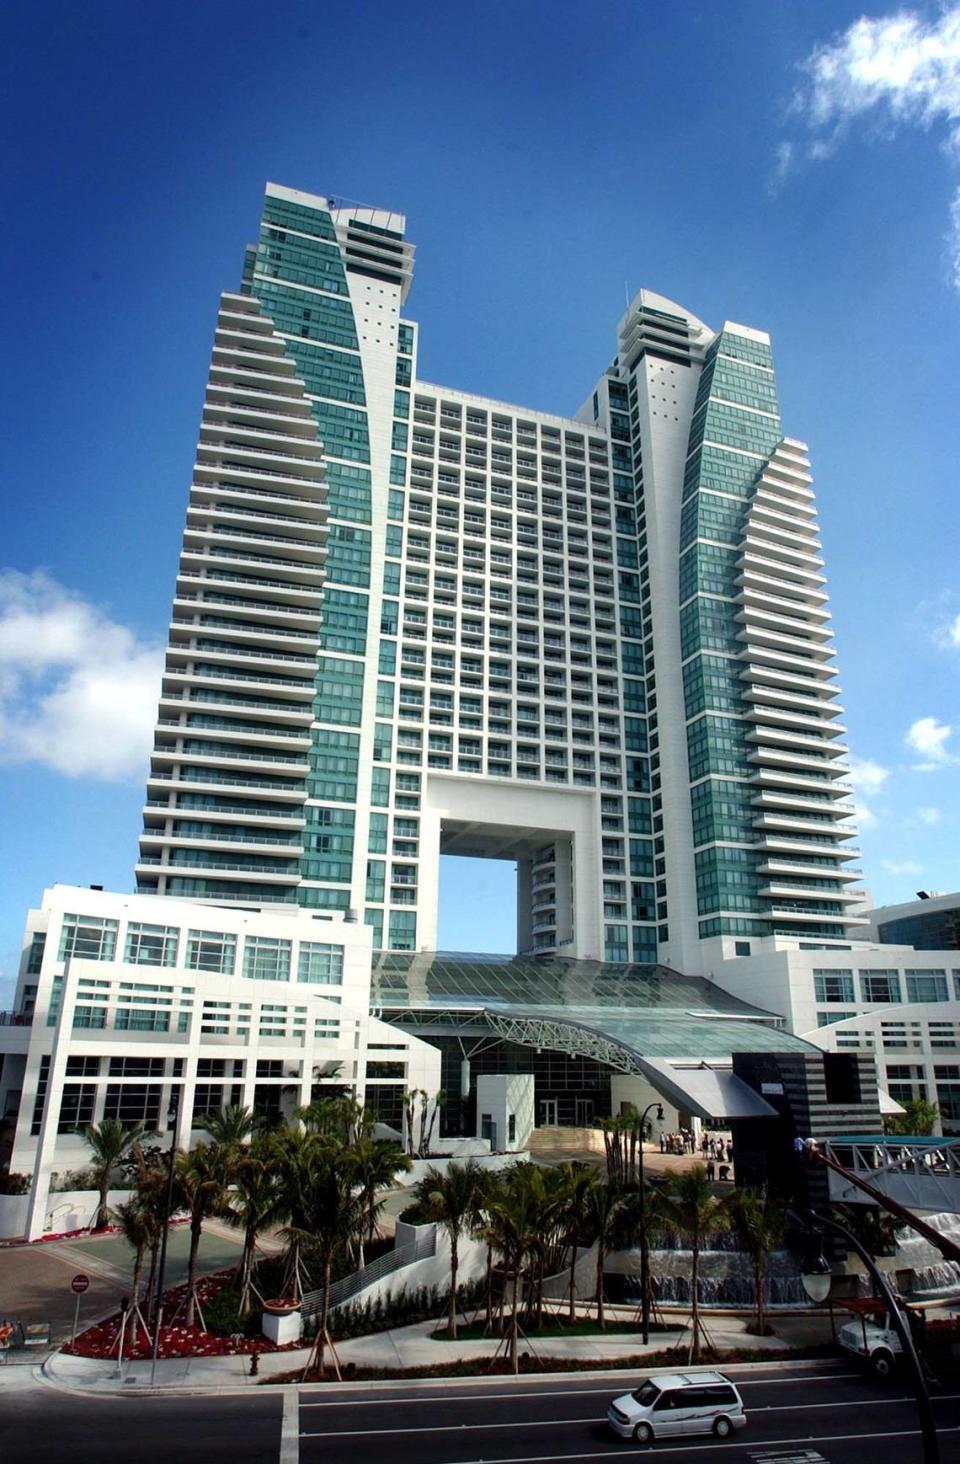 The Diplomat Beach Resort on Hollywood Beach is the second-largest hotel in South Florida.